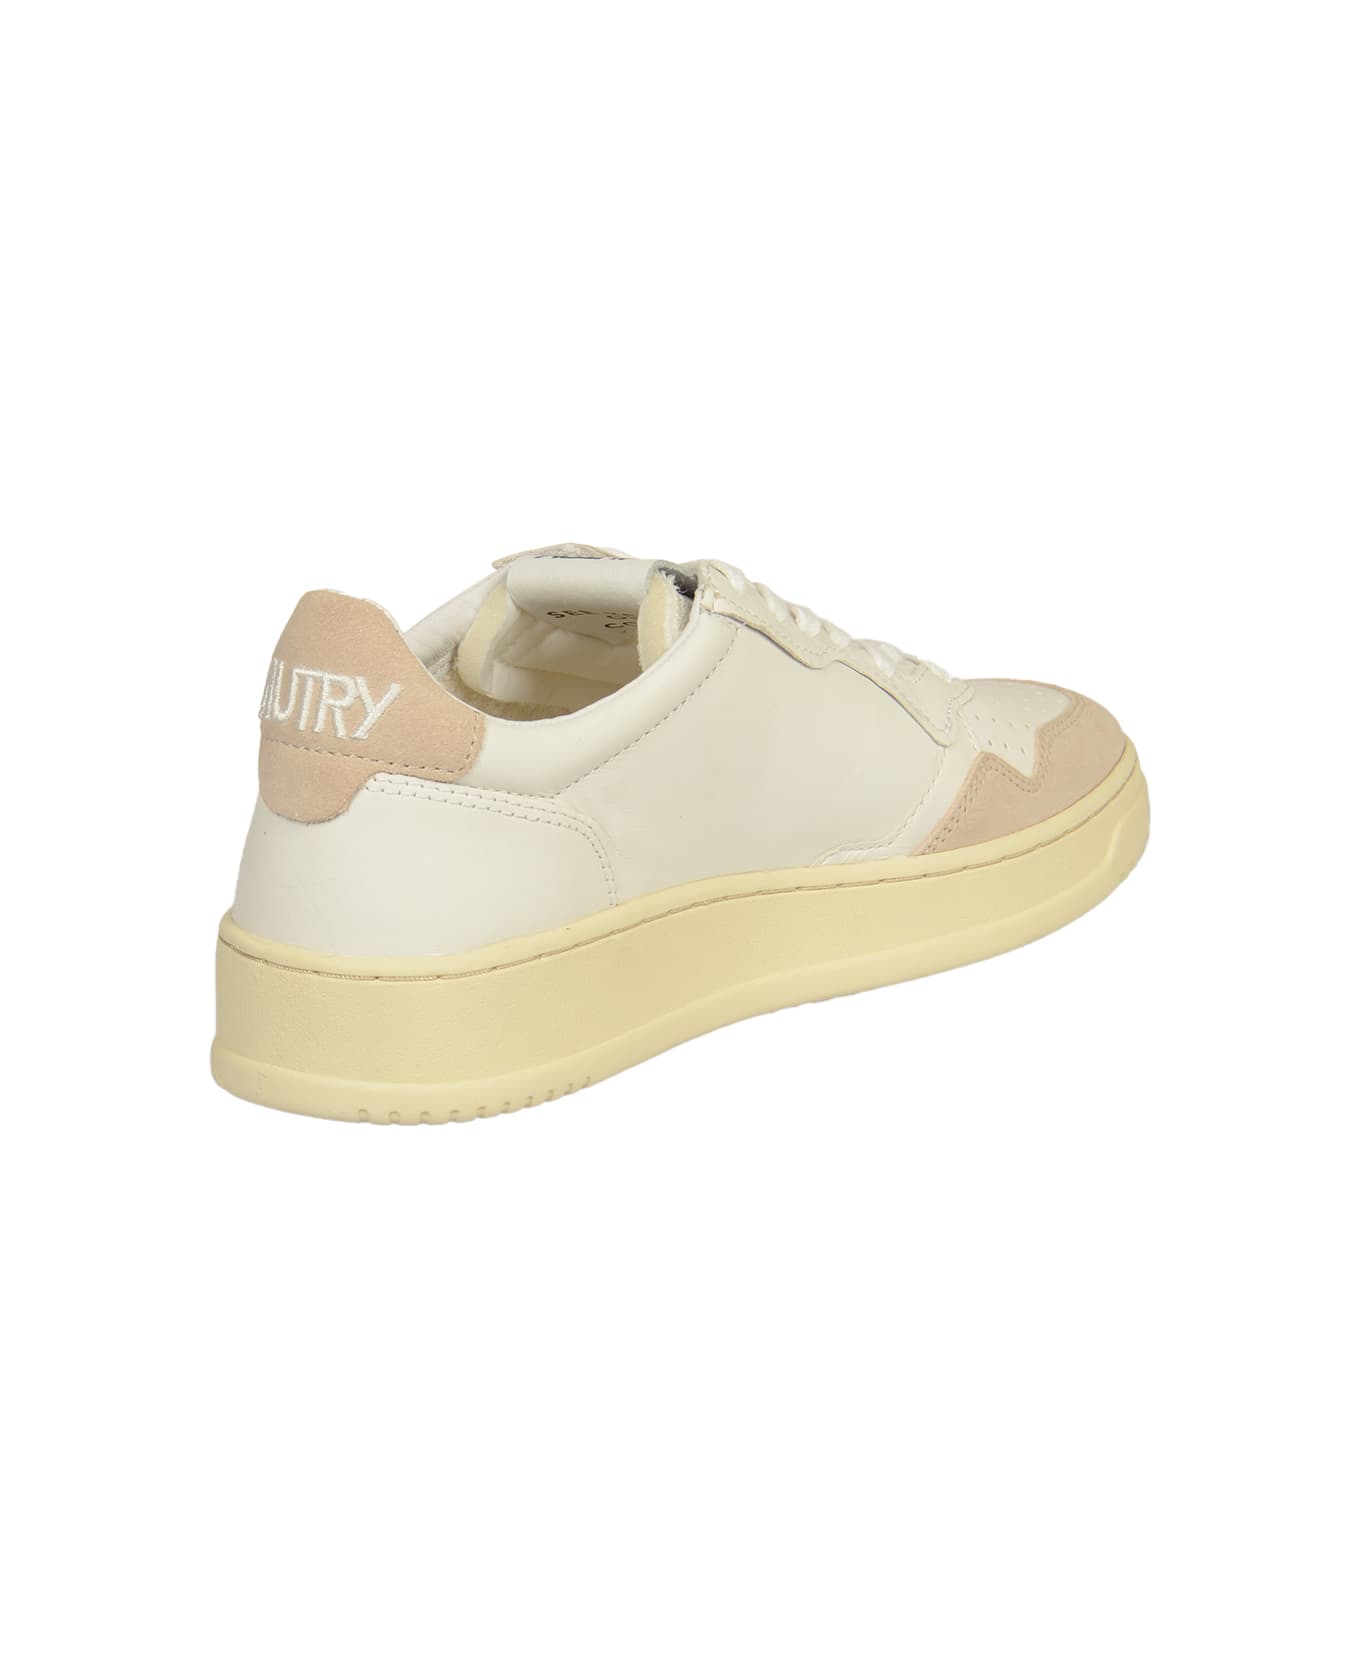 Autry Medalist Low Sneakers - White/Sand